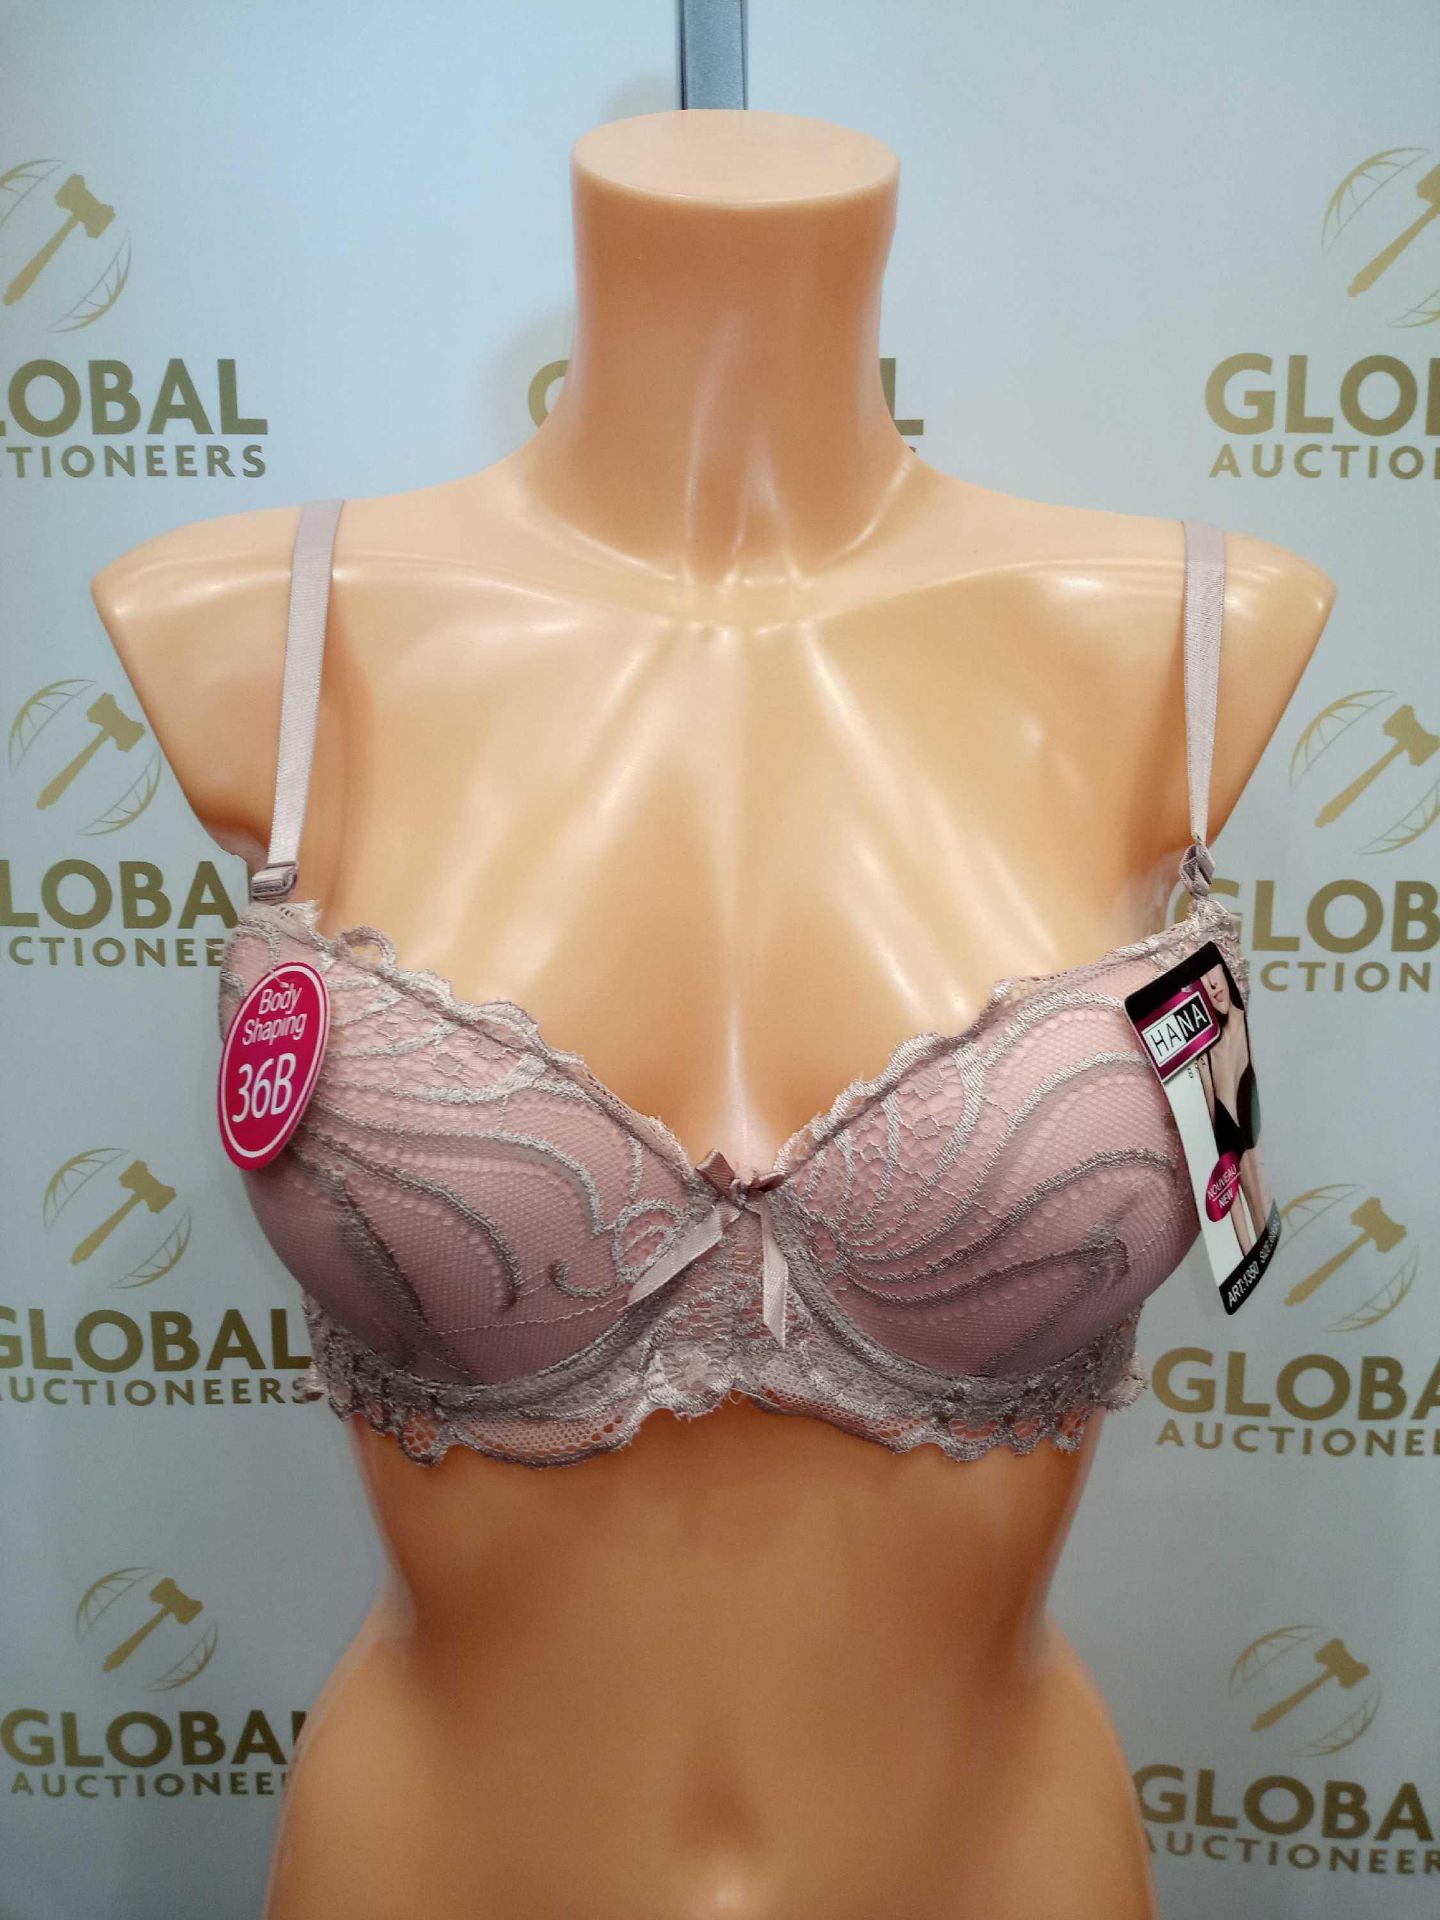 Rrp £270 Lot To Contain 3 Brand New Packs Of 6 Hana Body Shaping Lace Bras (Pink) 1350 - Image 2 of 2